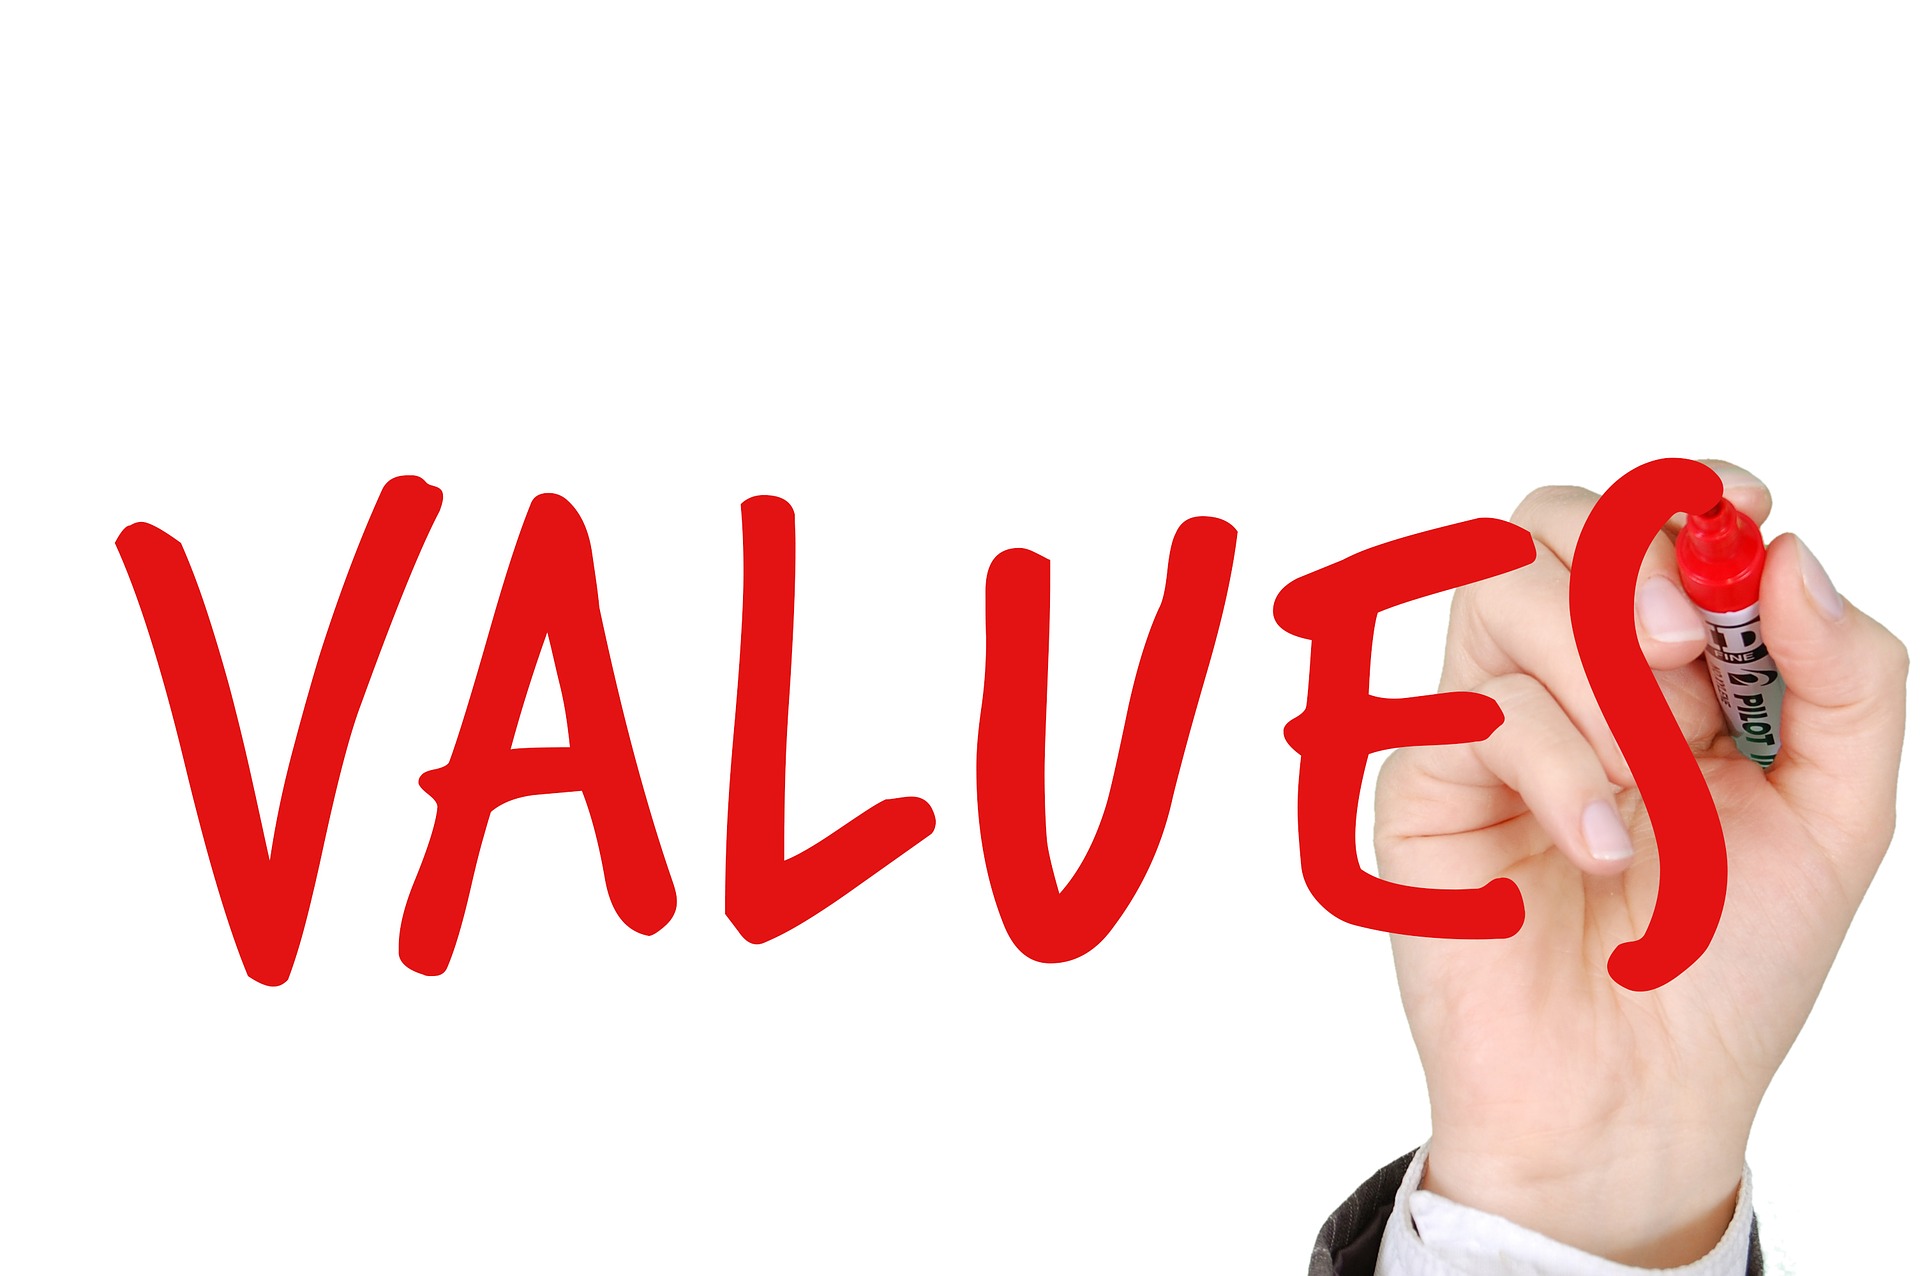 Defining and Living Team Values